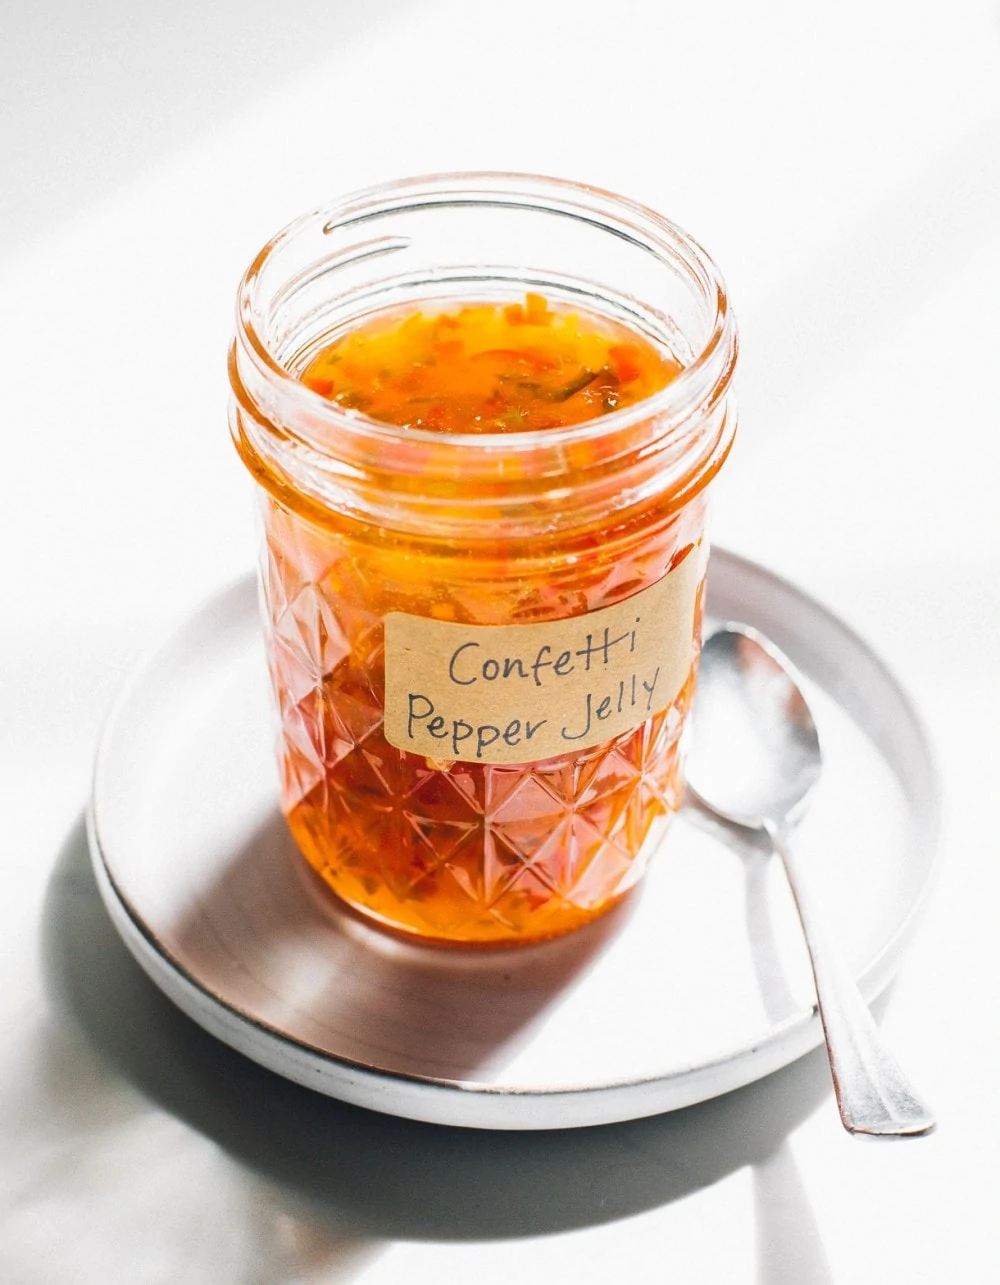 hot pepper jelly in a small glass canning jar with spoon to its right, both on a round plate